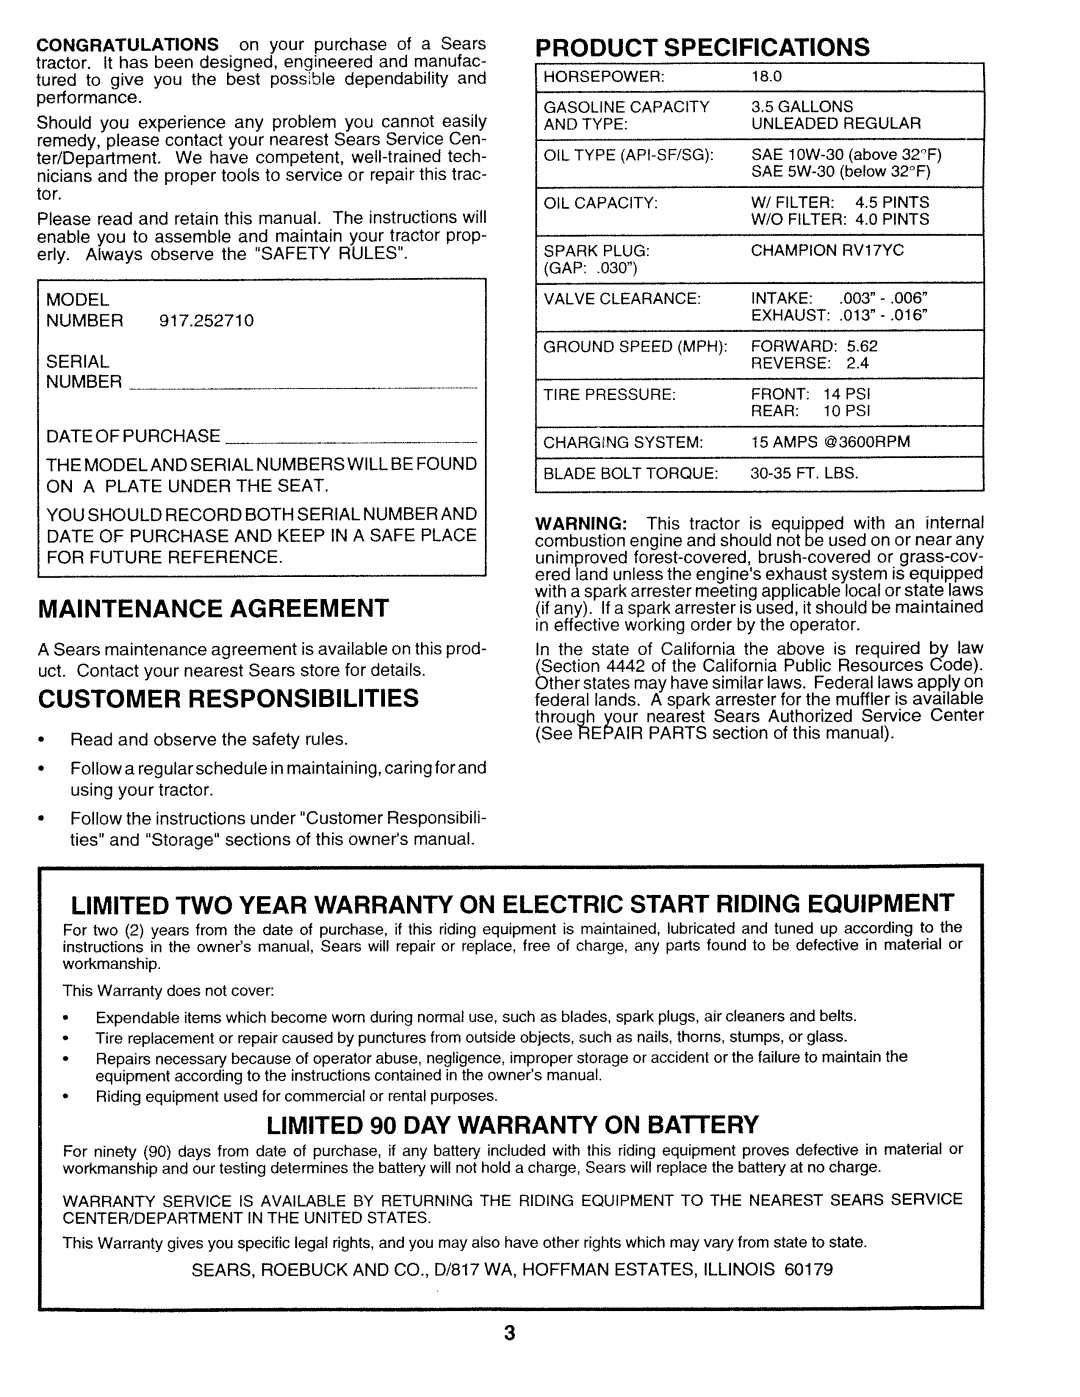 Sears 917.25271 owner manual Maintenance Agreement, Customer Responsibilities, Product Specifications 